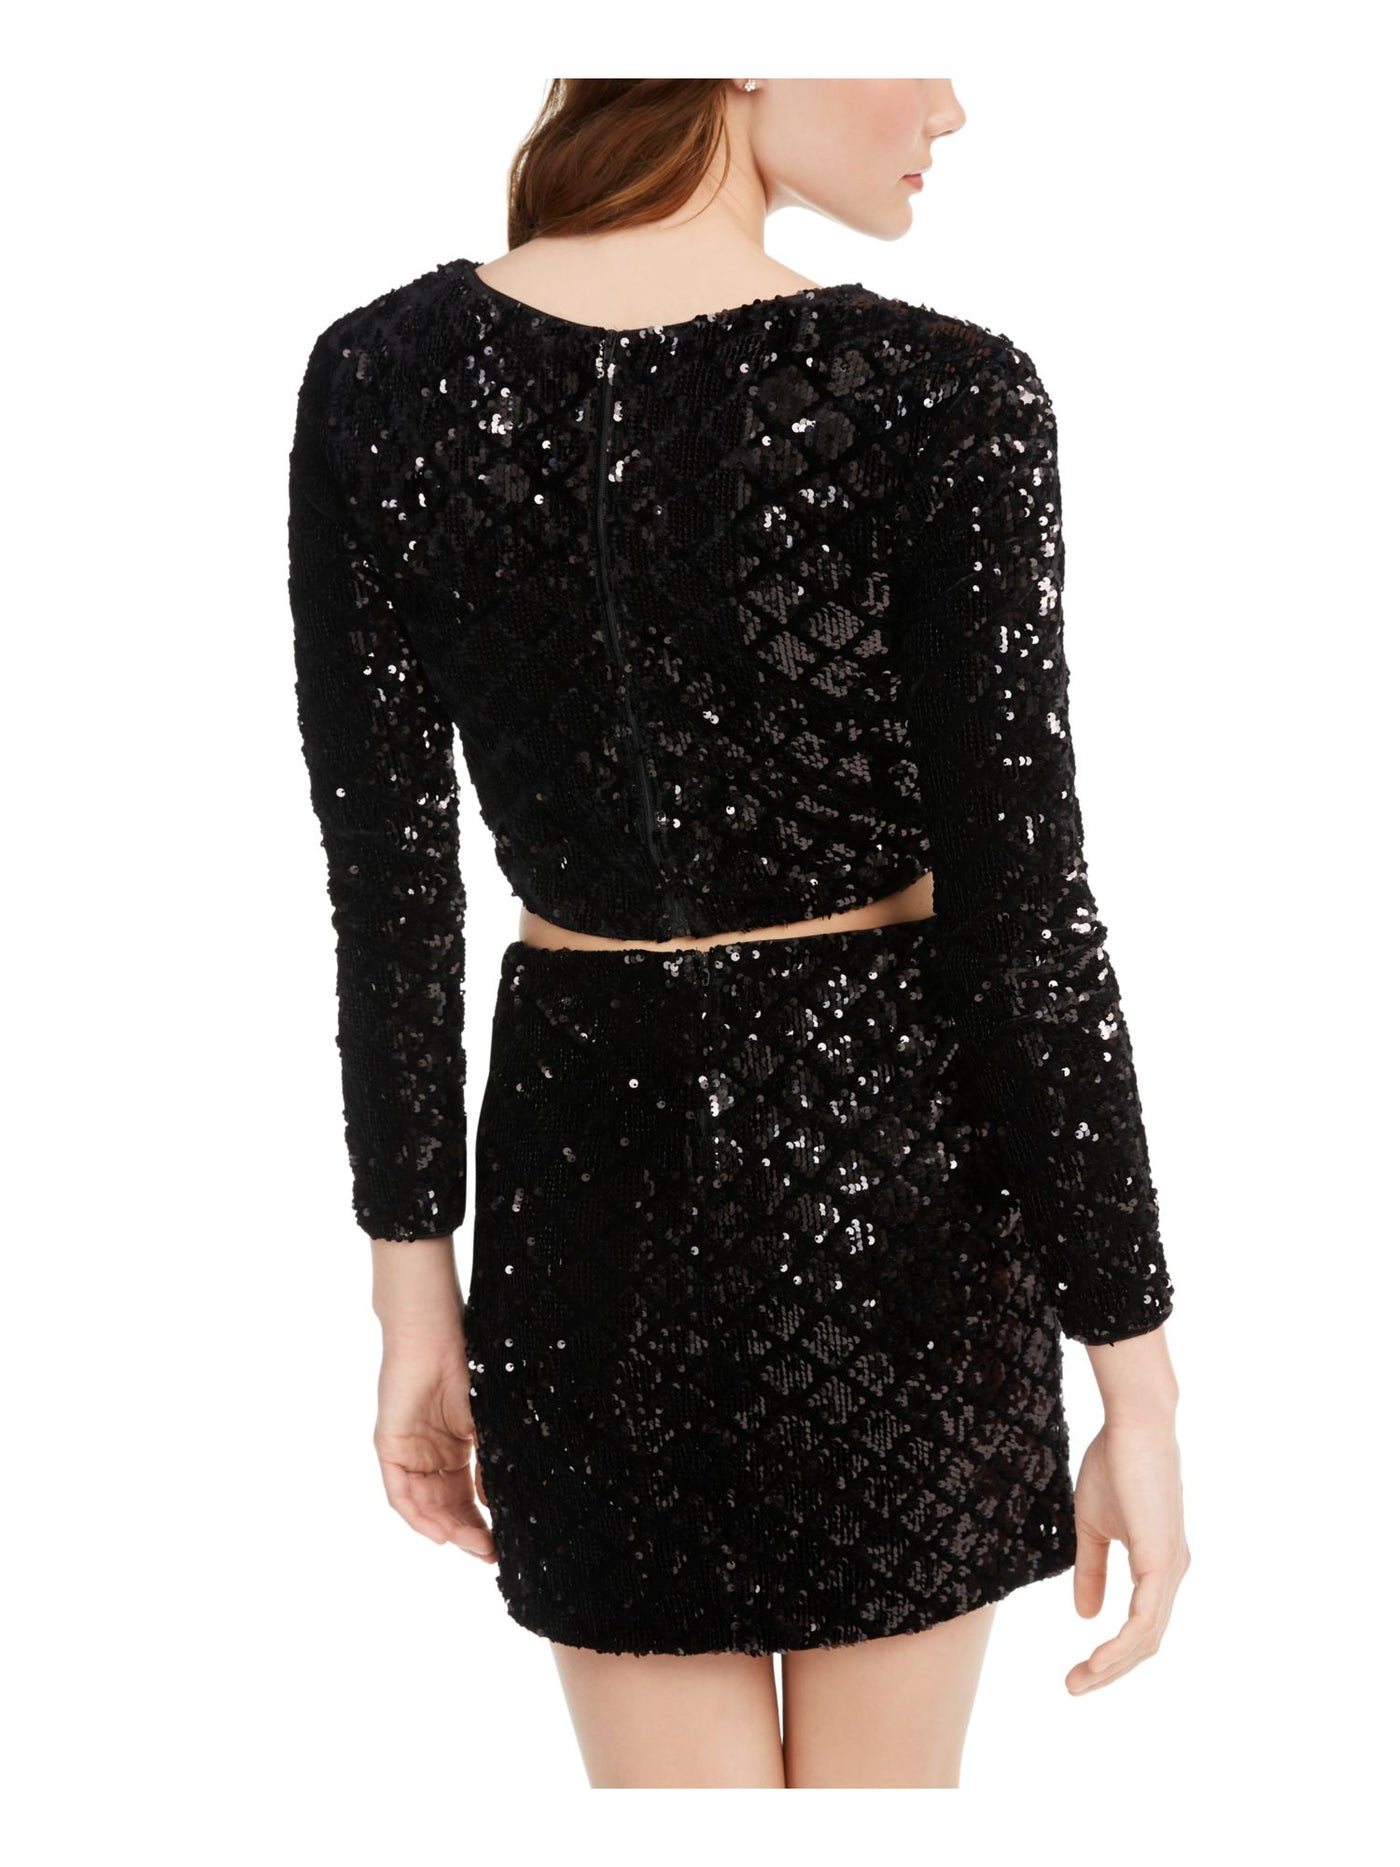 CRYSTAL DOLLS Womens Black Sequined With Pencil Skirt 3/4 Sleeve Jewel Neck Cocktail Crop Top Juniors 9